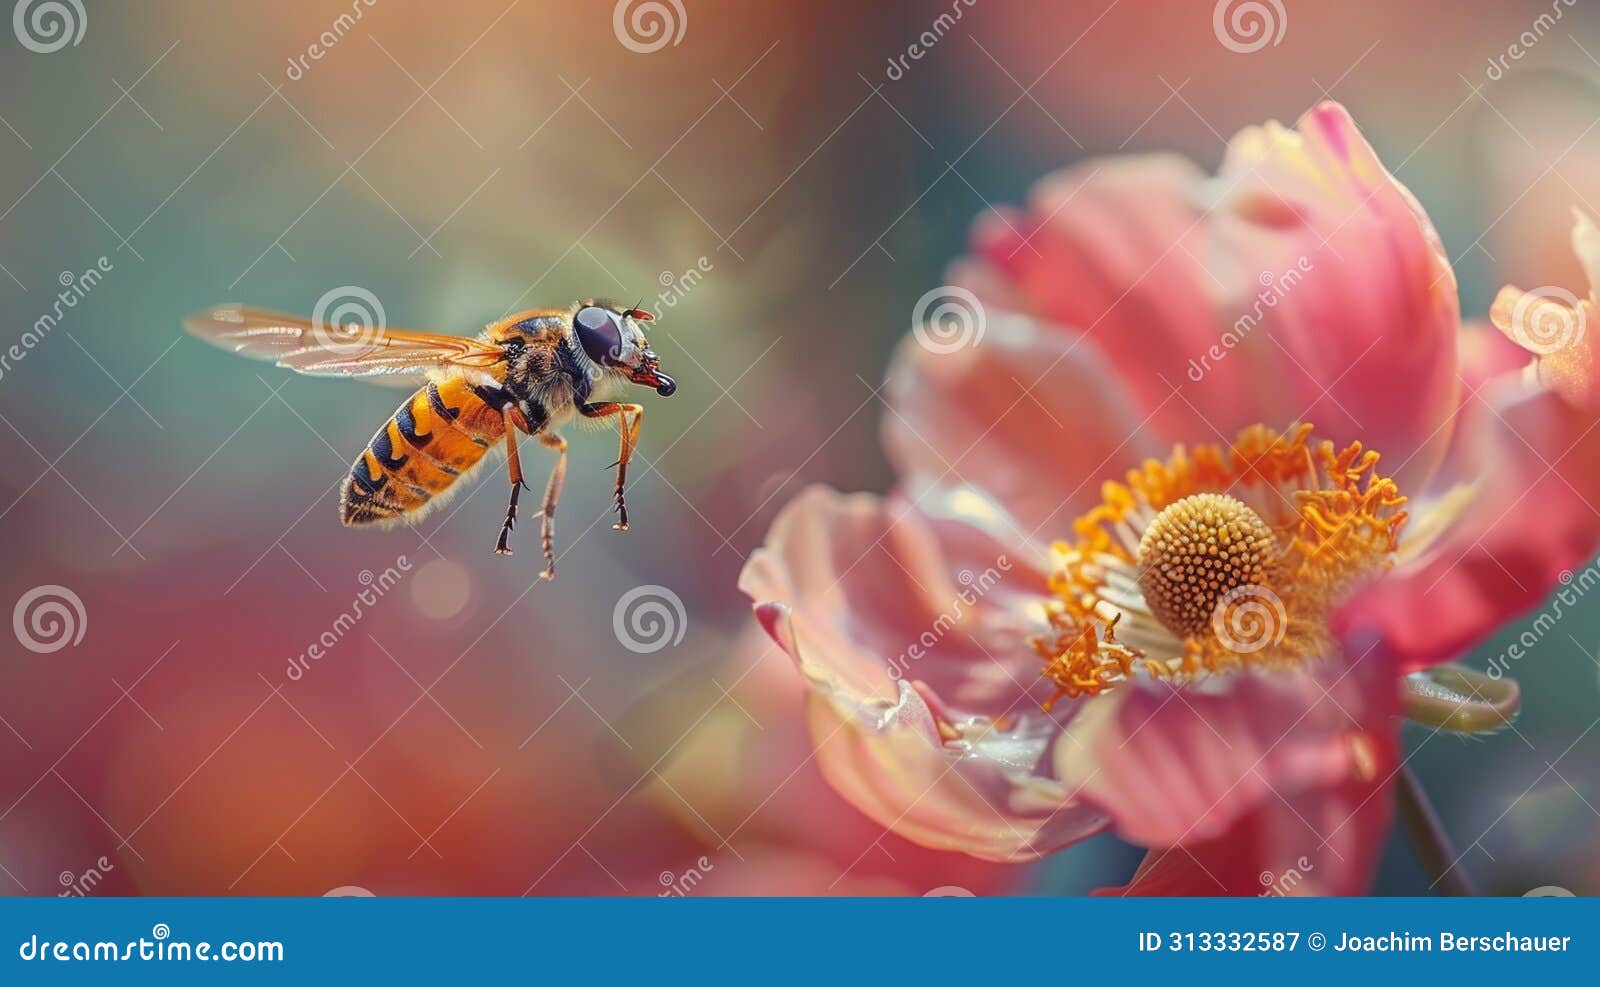 hoverfly in midflight with vibrant flower, macro perspective, realistic textures, ultra high res